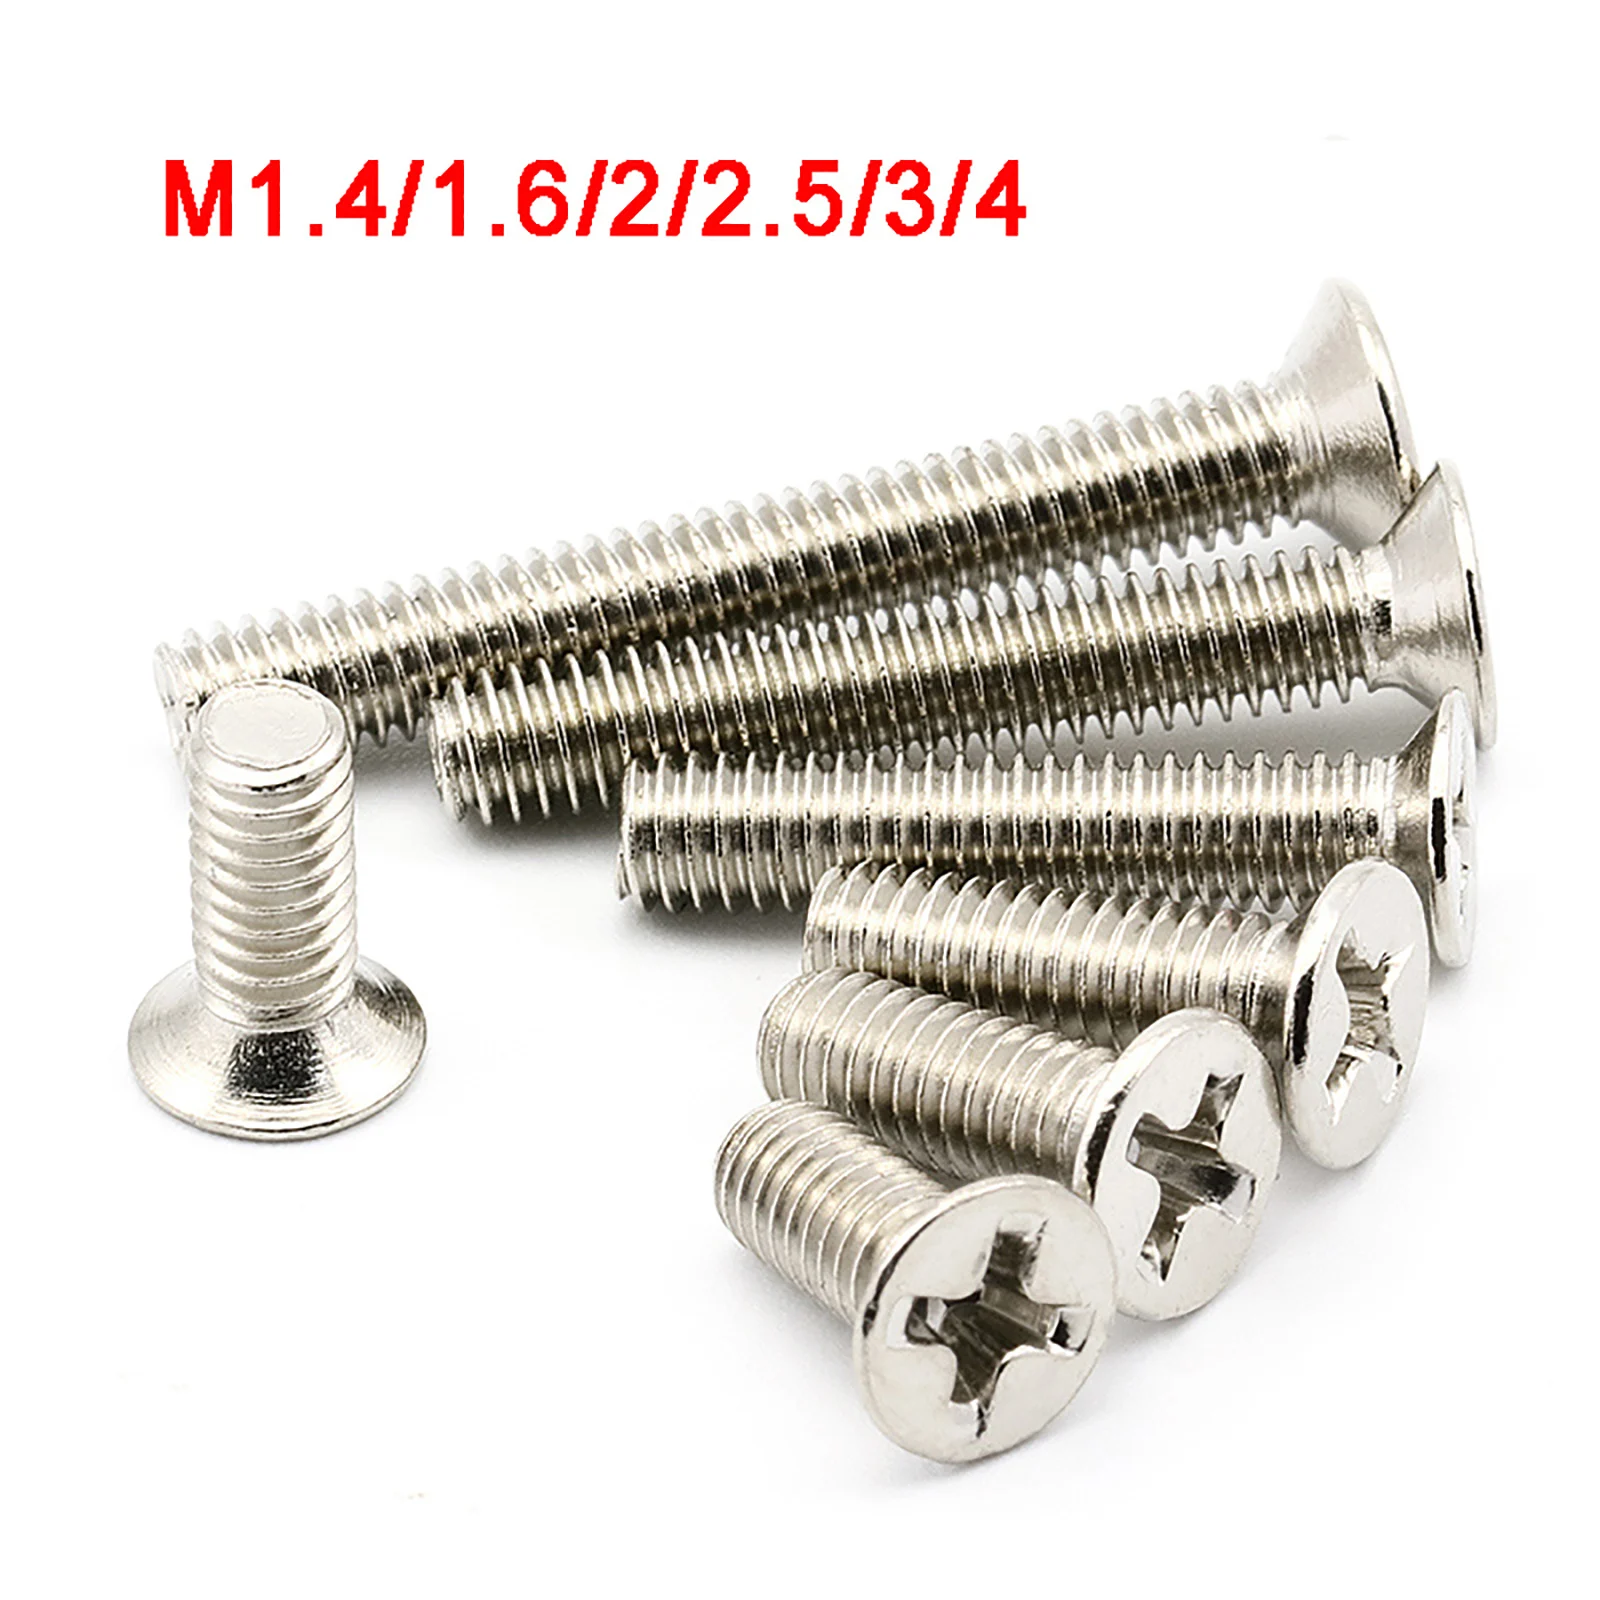 M1.2 to M4 Pan Round Head Machine Screw Bolts Phillips Drive Ni-Plated Steel 